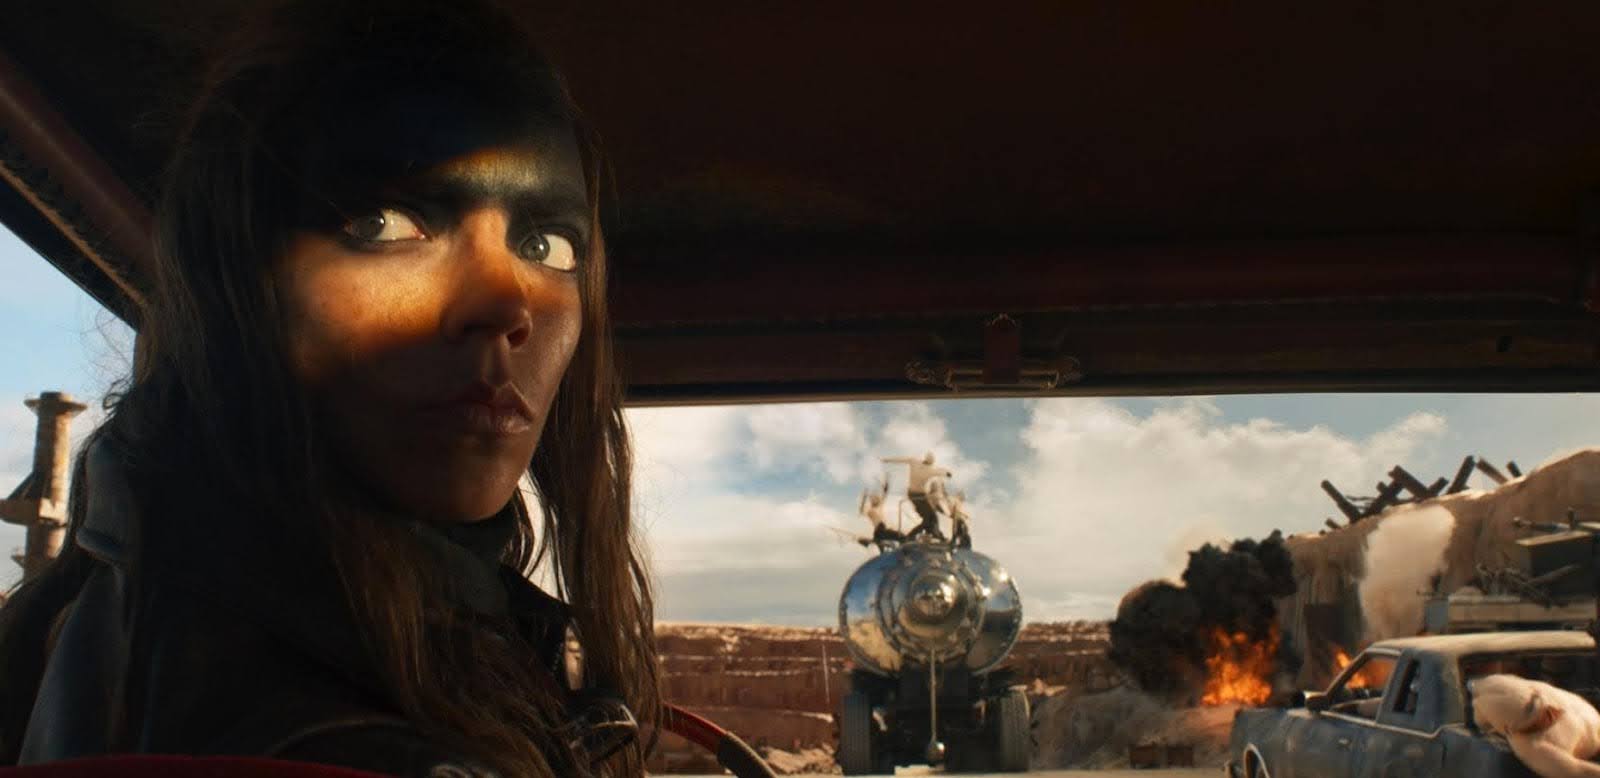 A woman in a car looks out at the desert in this image from Village Roadshow Pictures